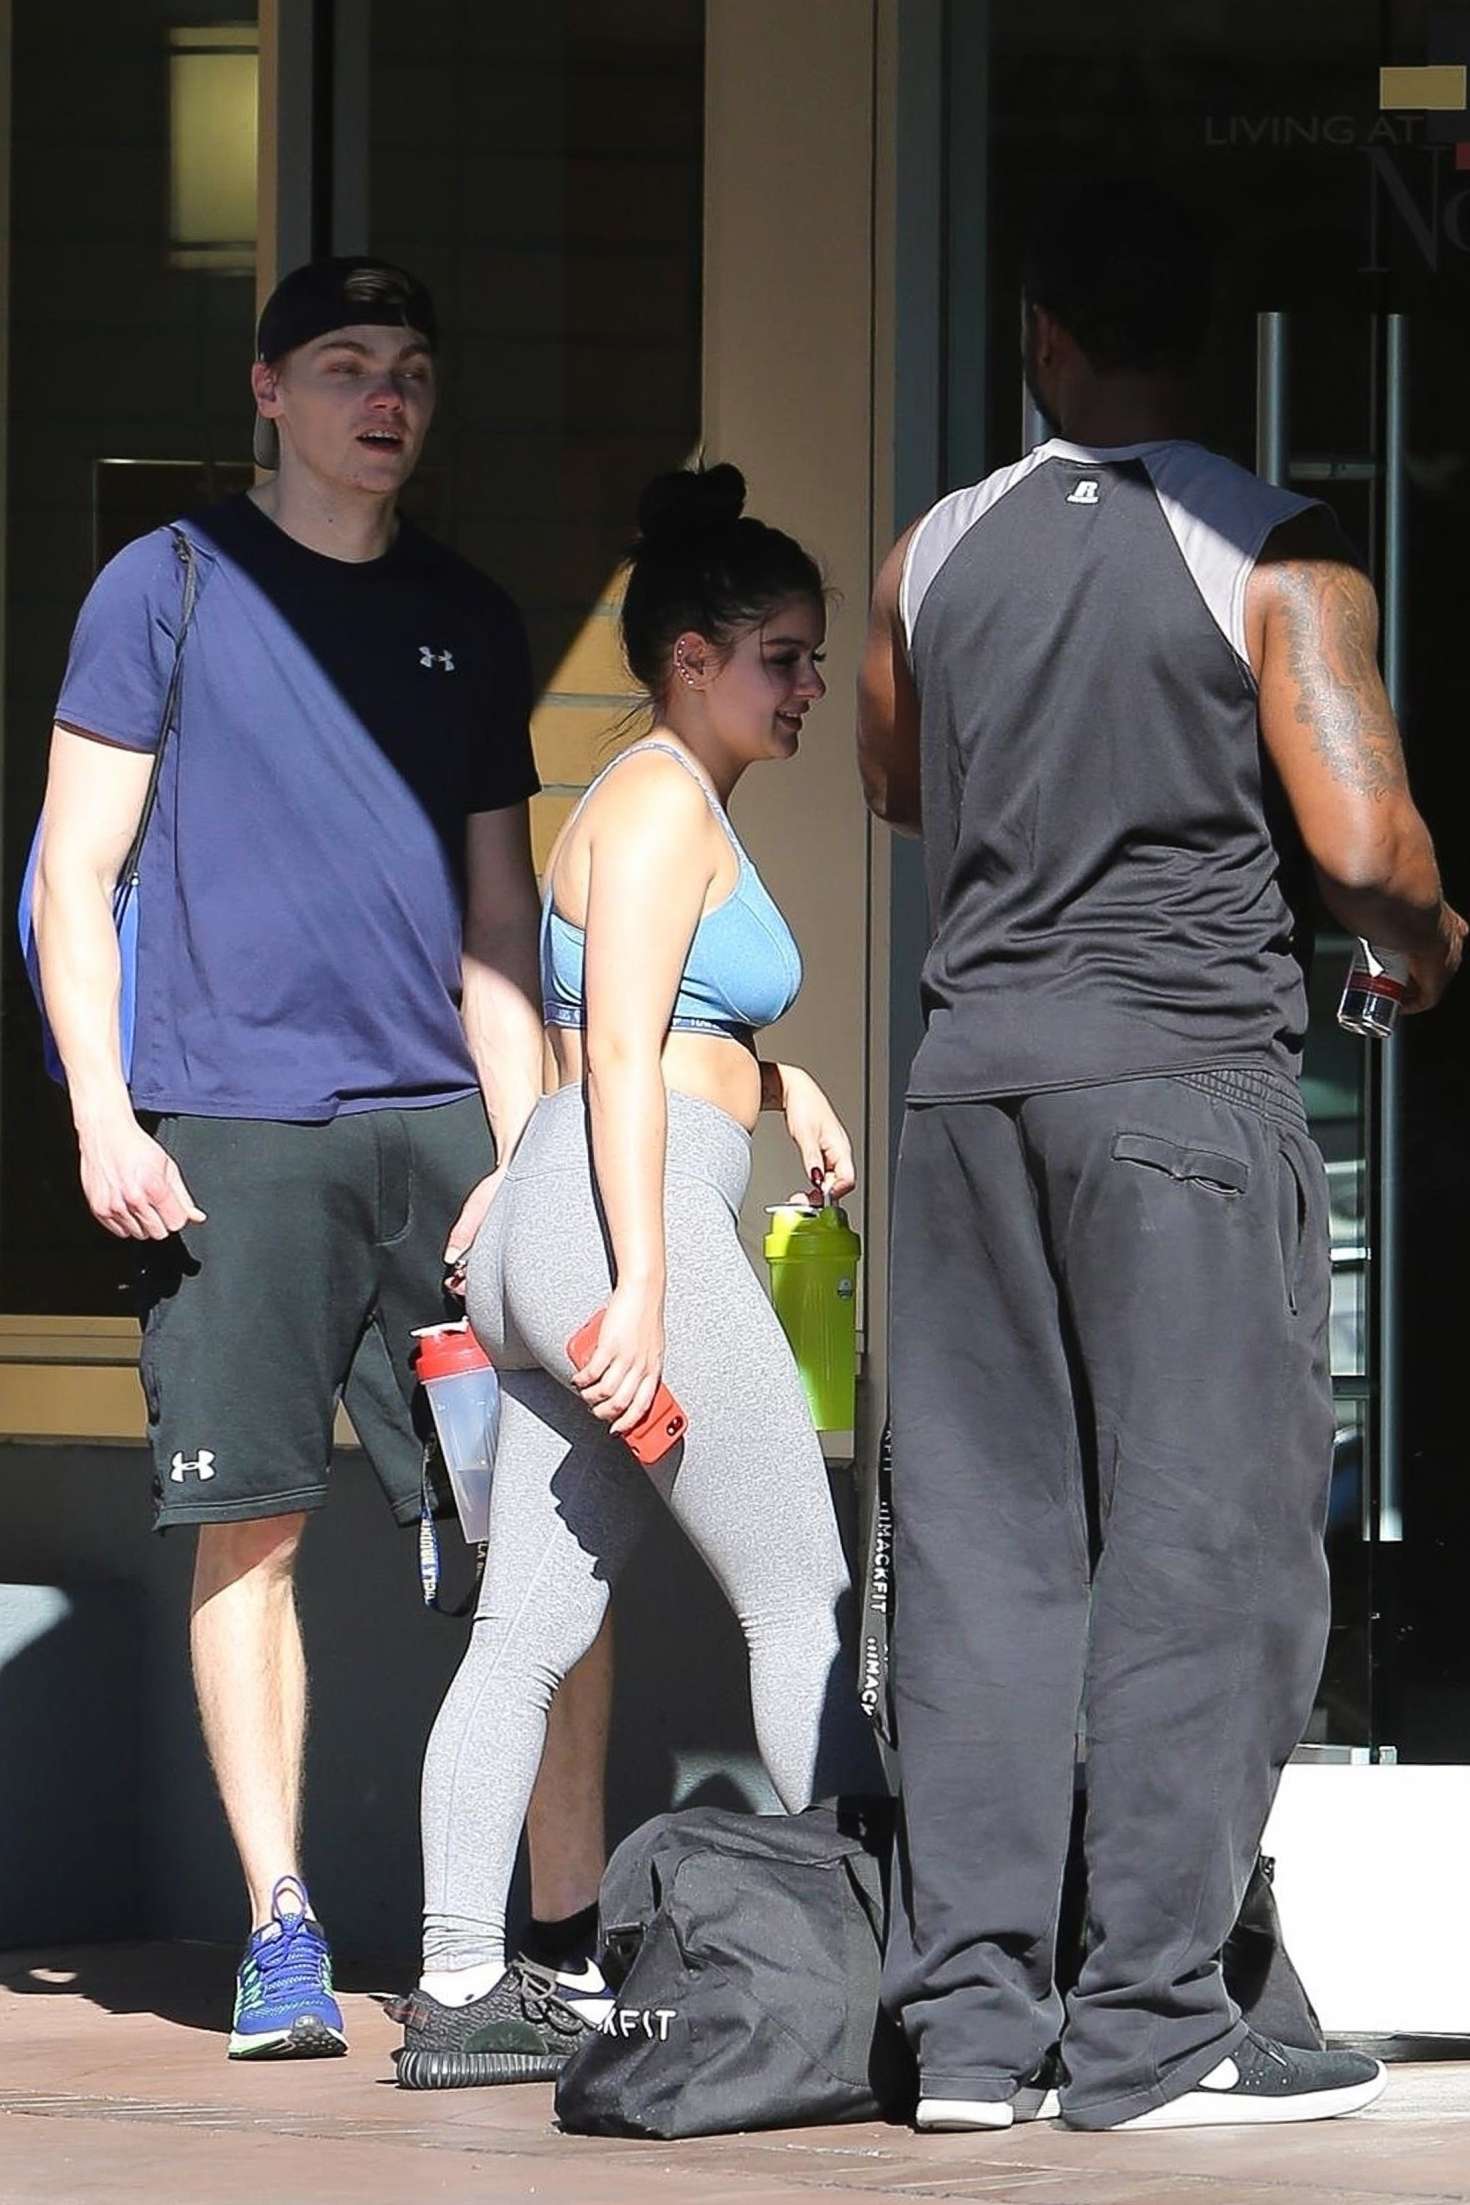 Ariel Winter 2017 : Ariel Winter: Hits the gym with Levi Meaden -09. 